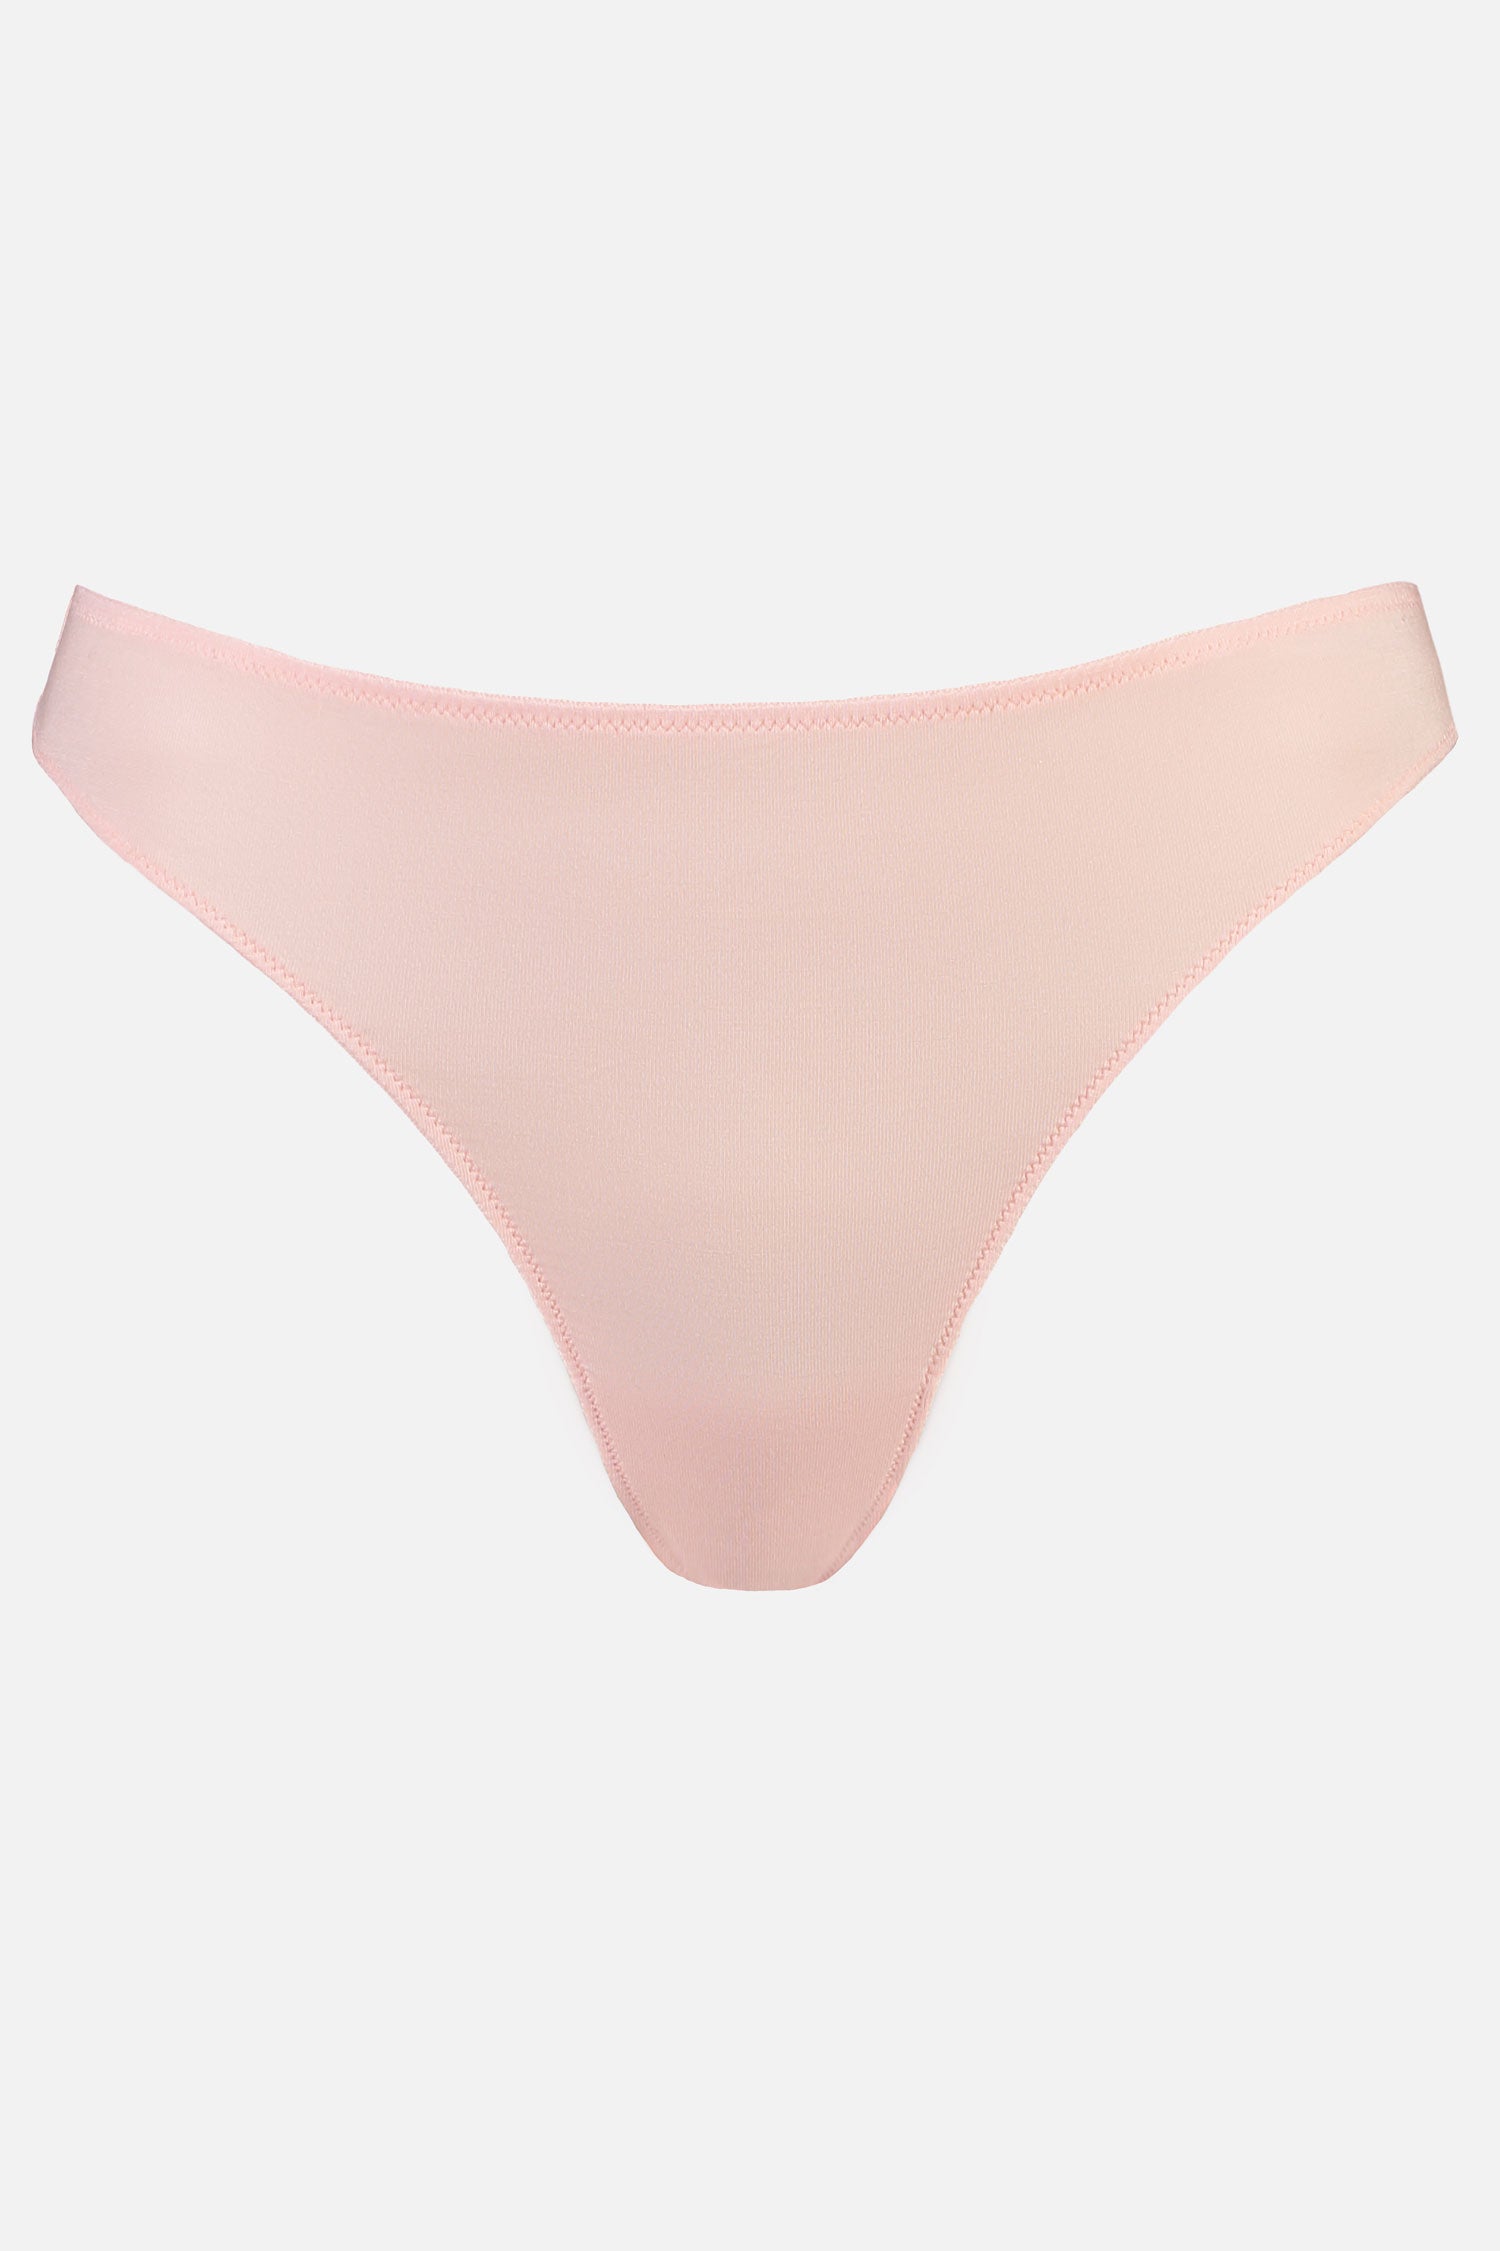 Videris Lingerie bikini knicker in rosy pink TENCEL™ a comfortable mid-rise style cut to follow the natural curve of your hips